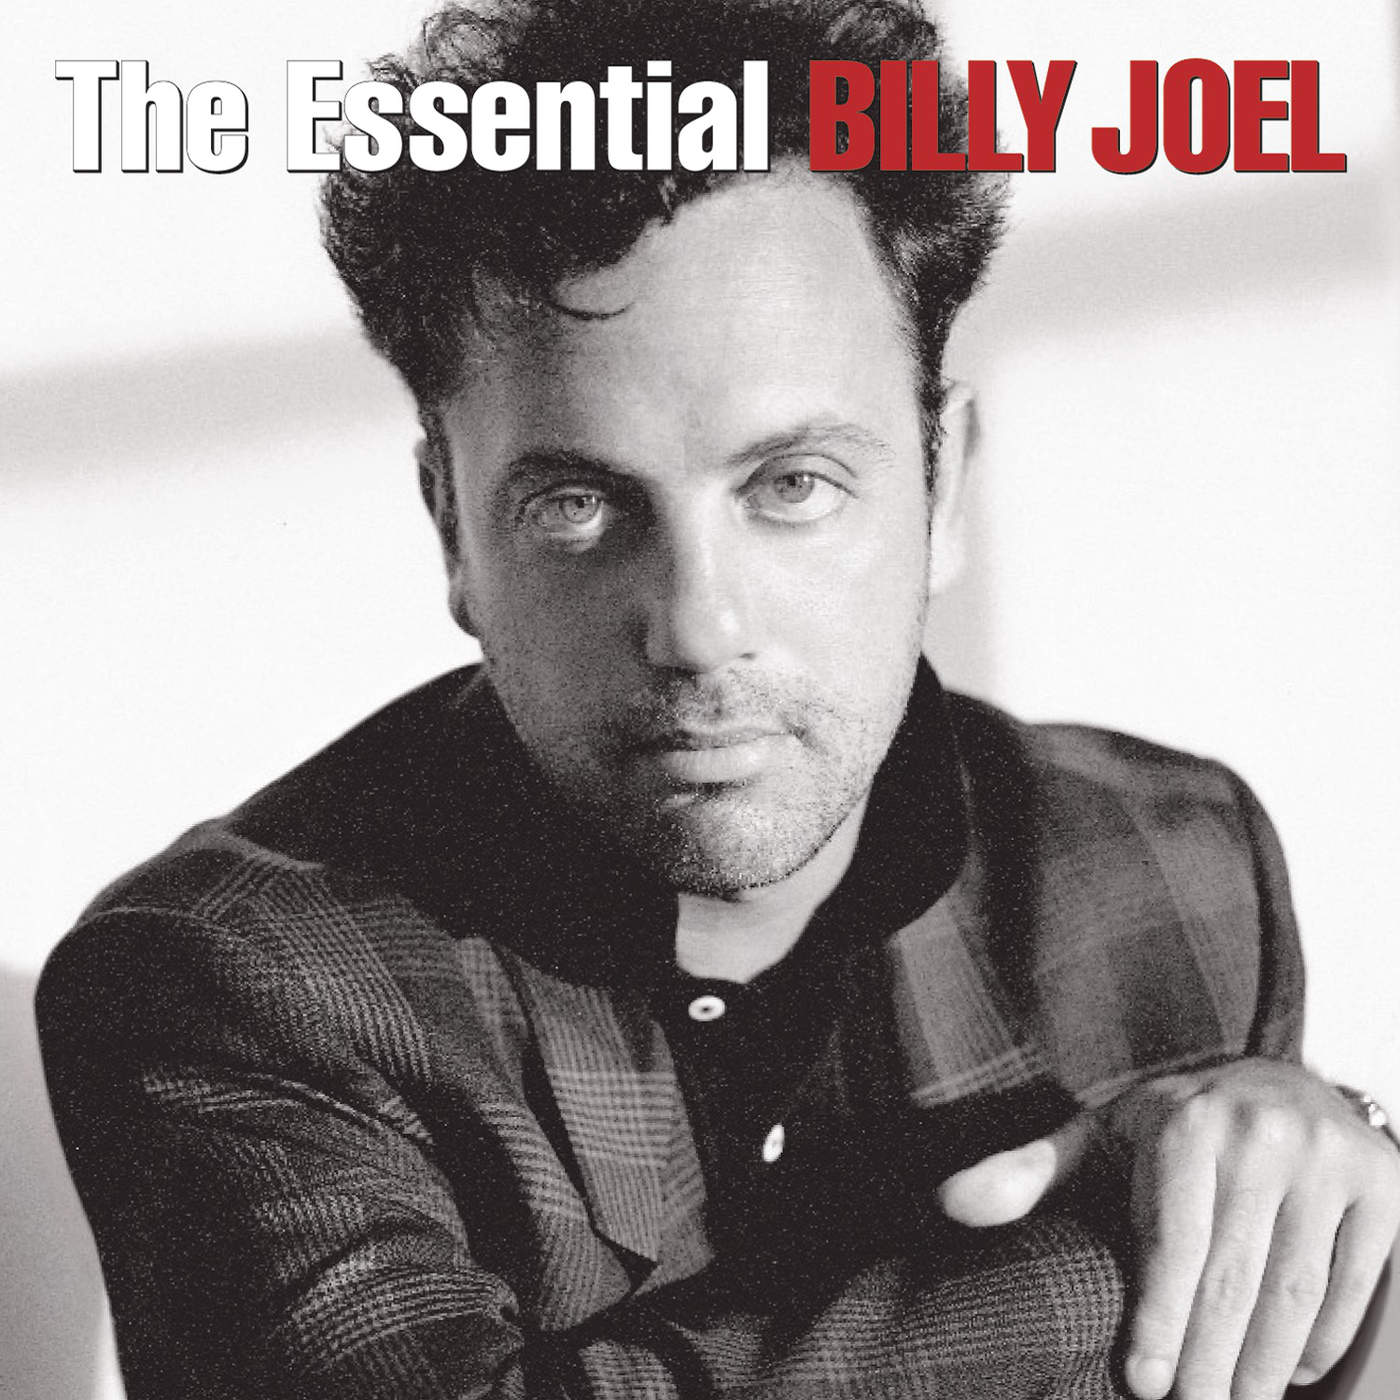 Art for Just the Way You Are by Billy Joel